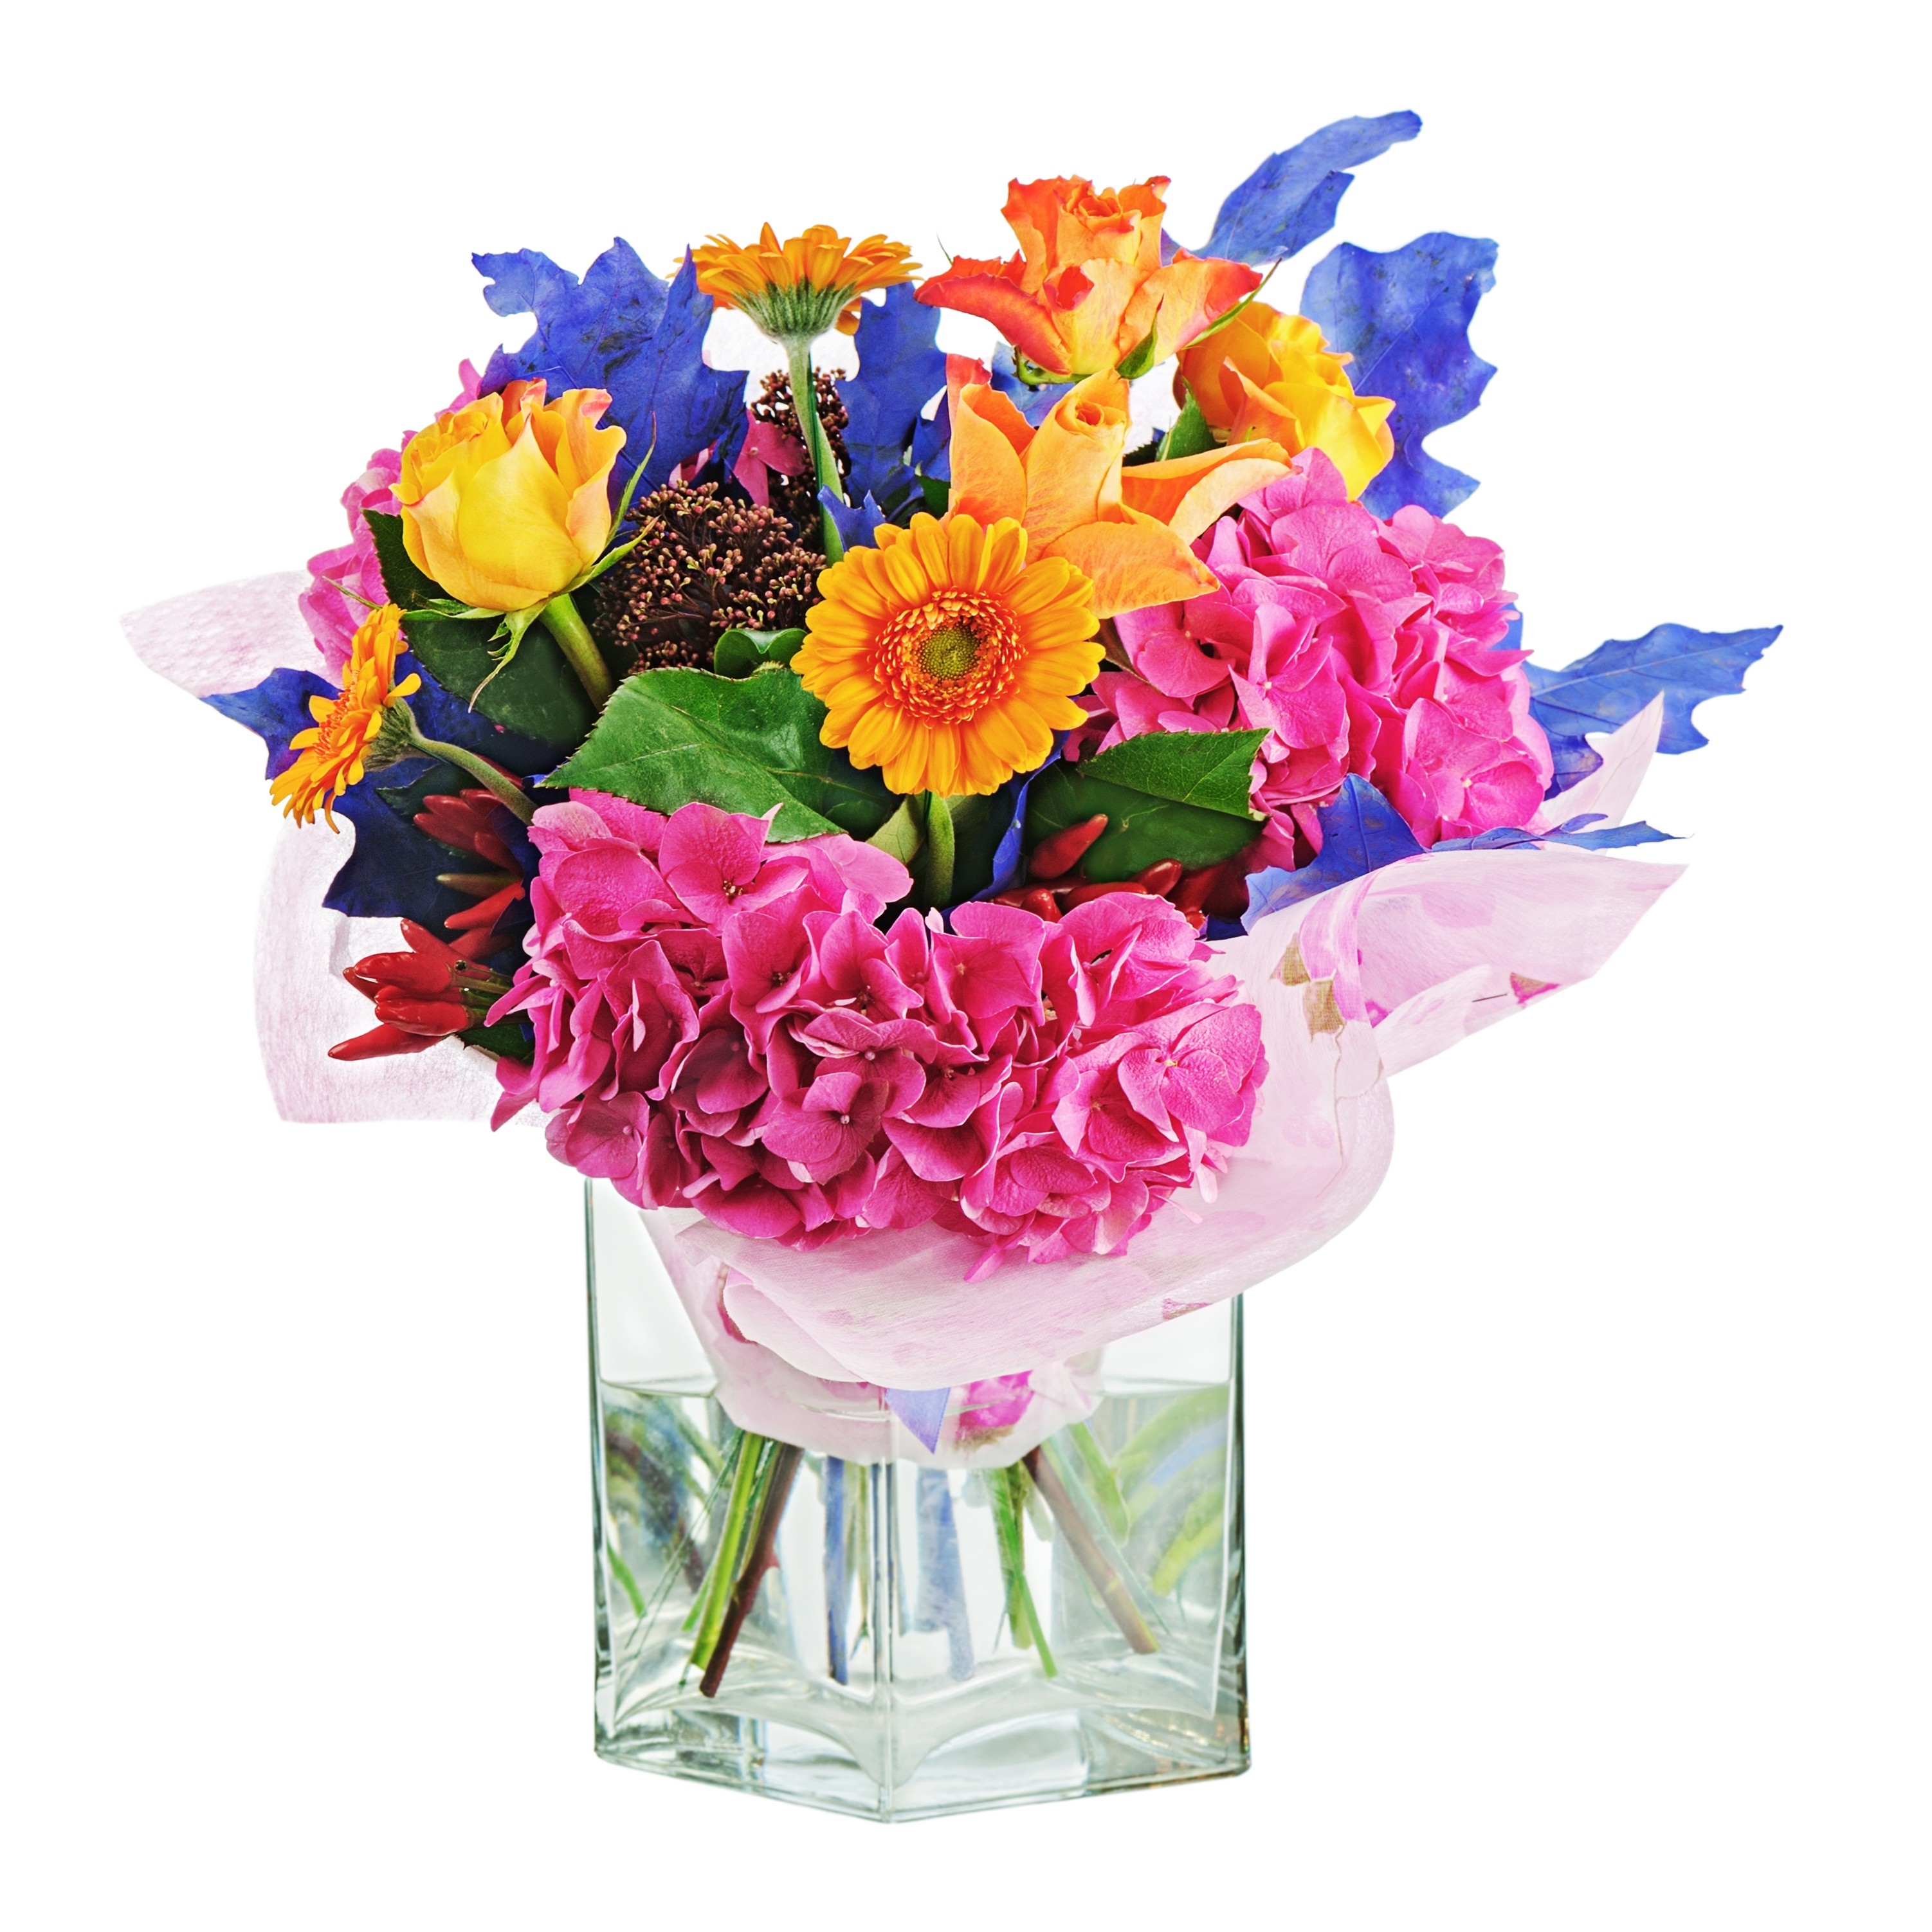 Colorful Flower Bouquet in Tustin, CA | Flowers By Evie Gray